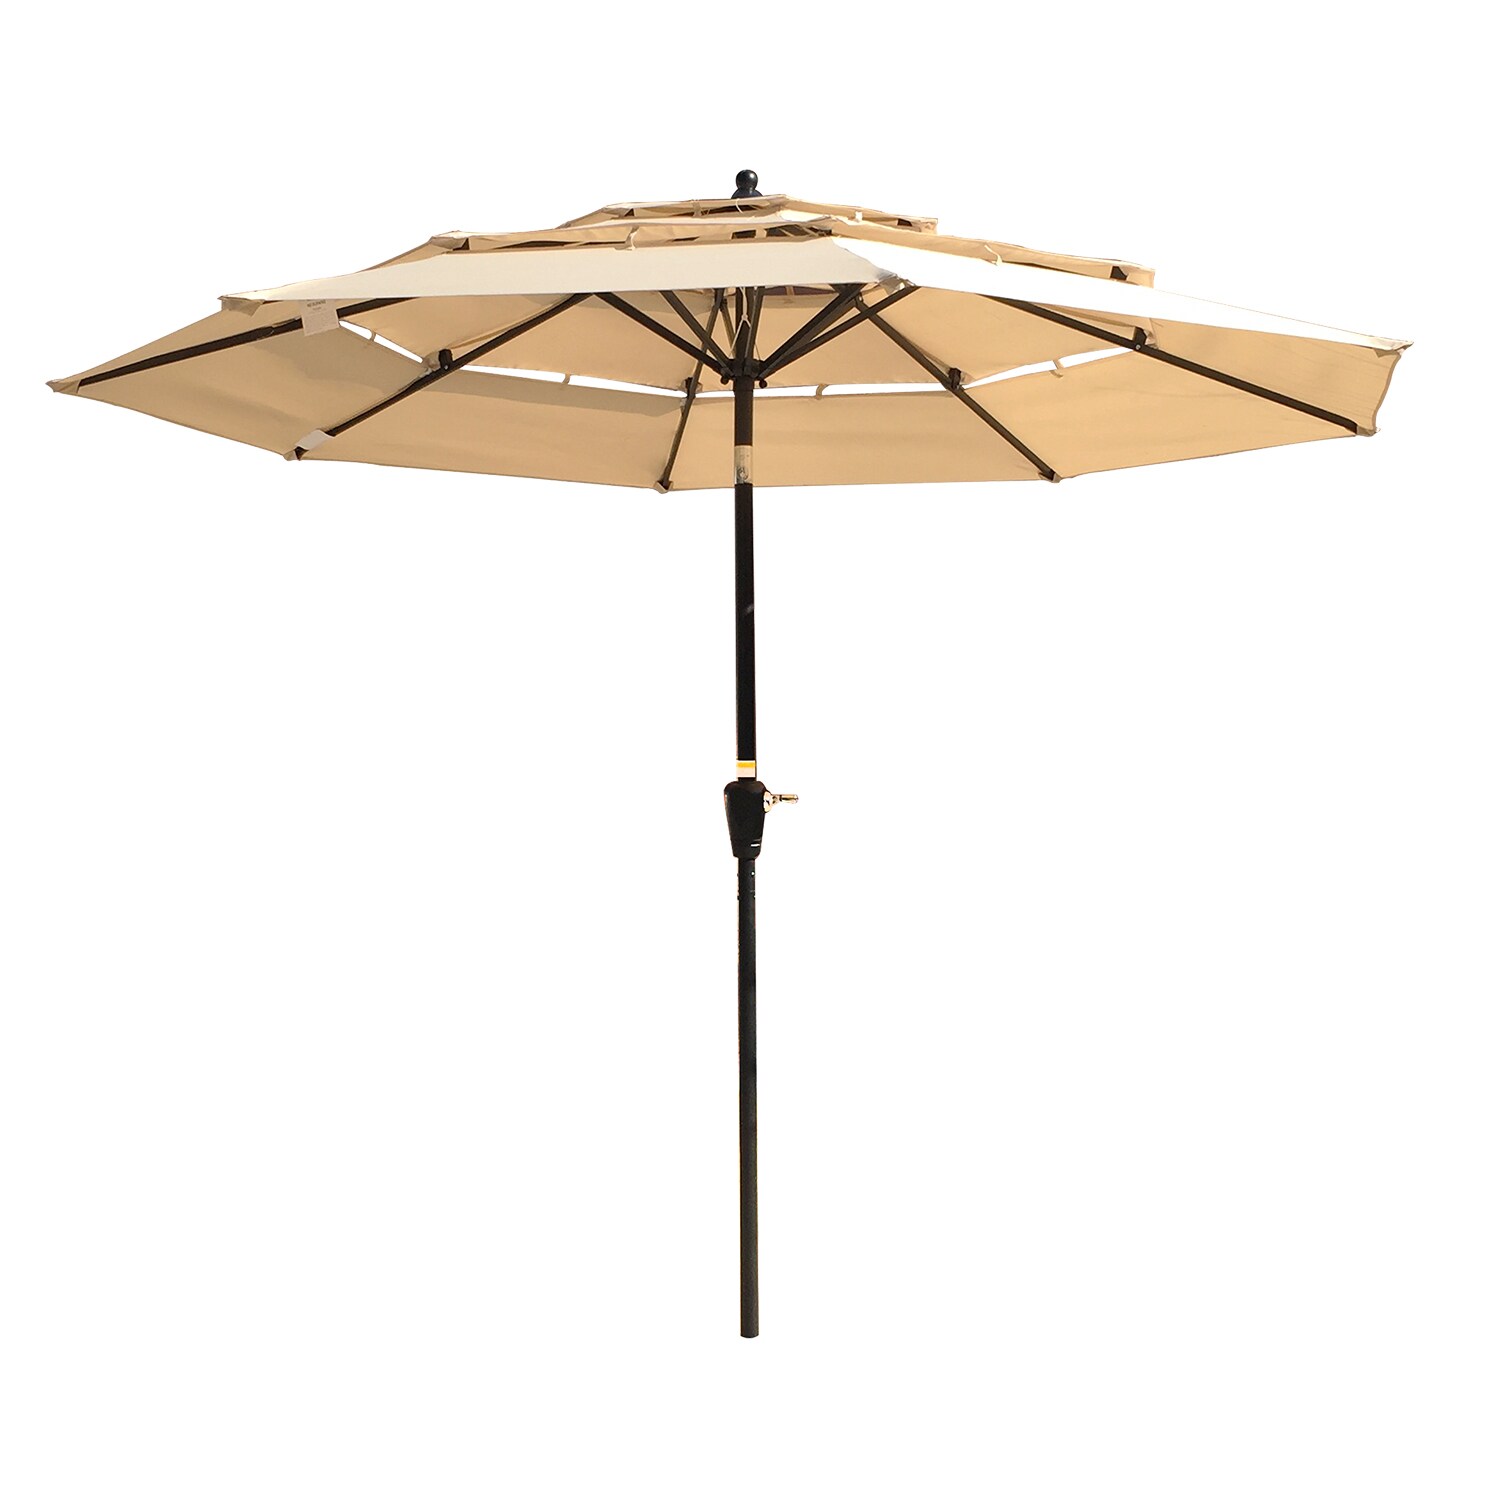 C-Hopetree 11 ft Diameter LED Lighted Outdoor Patio Table Market Umbrella with Push Button Tilt Ivory 